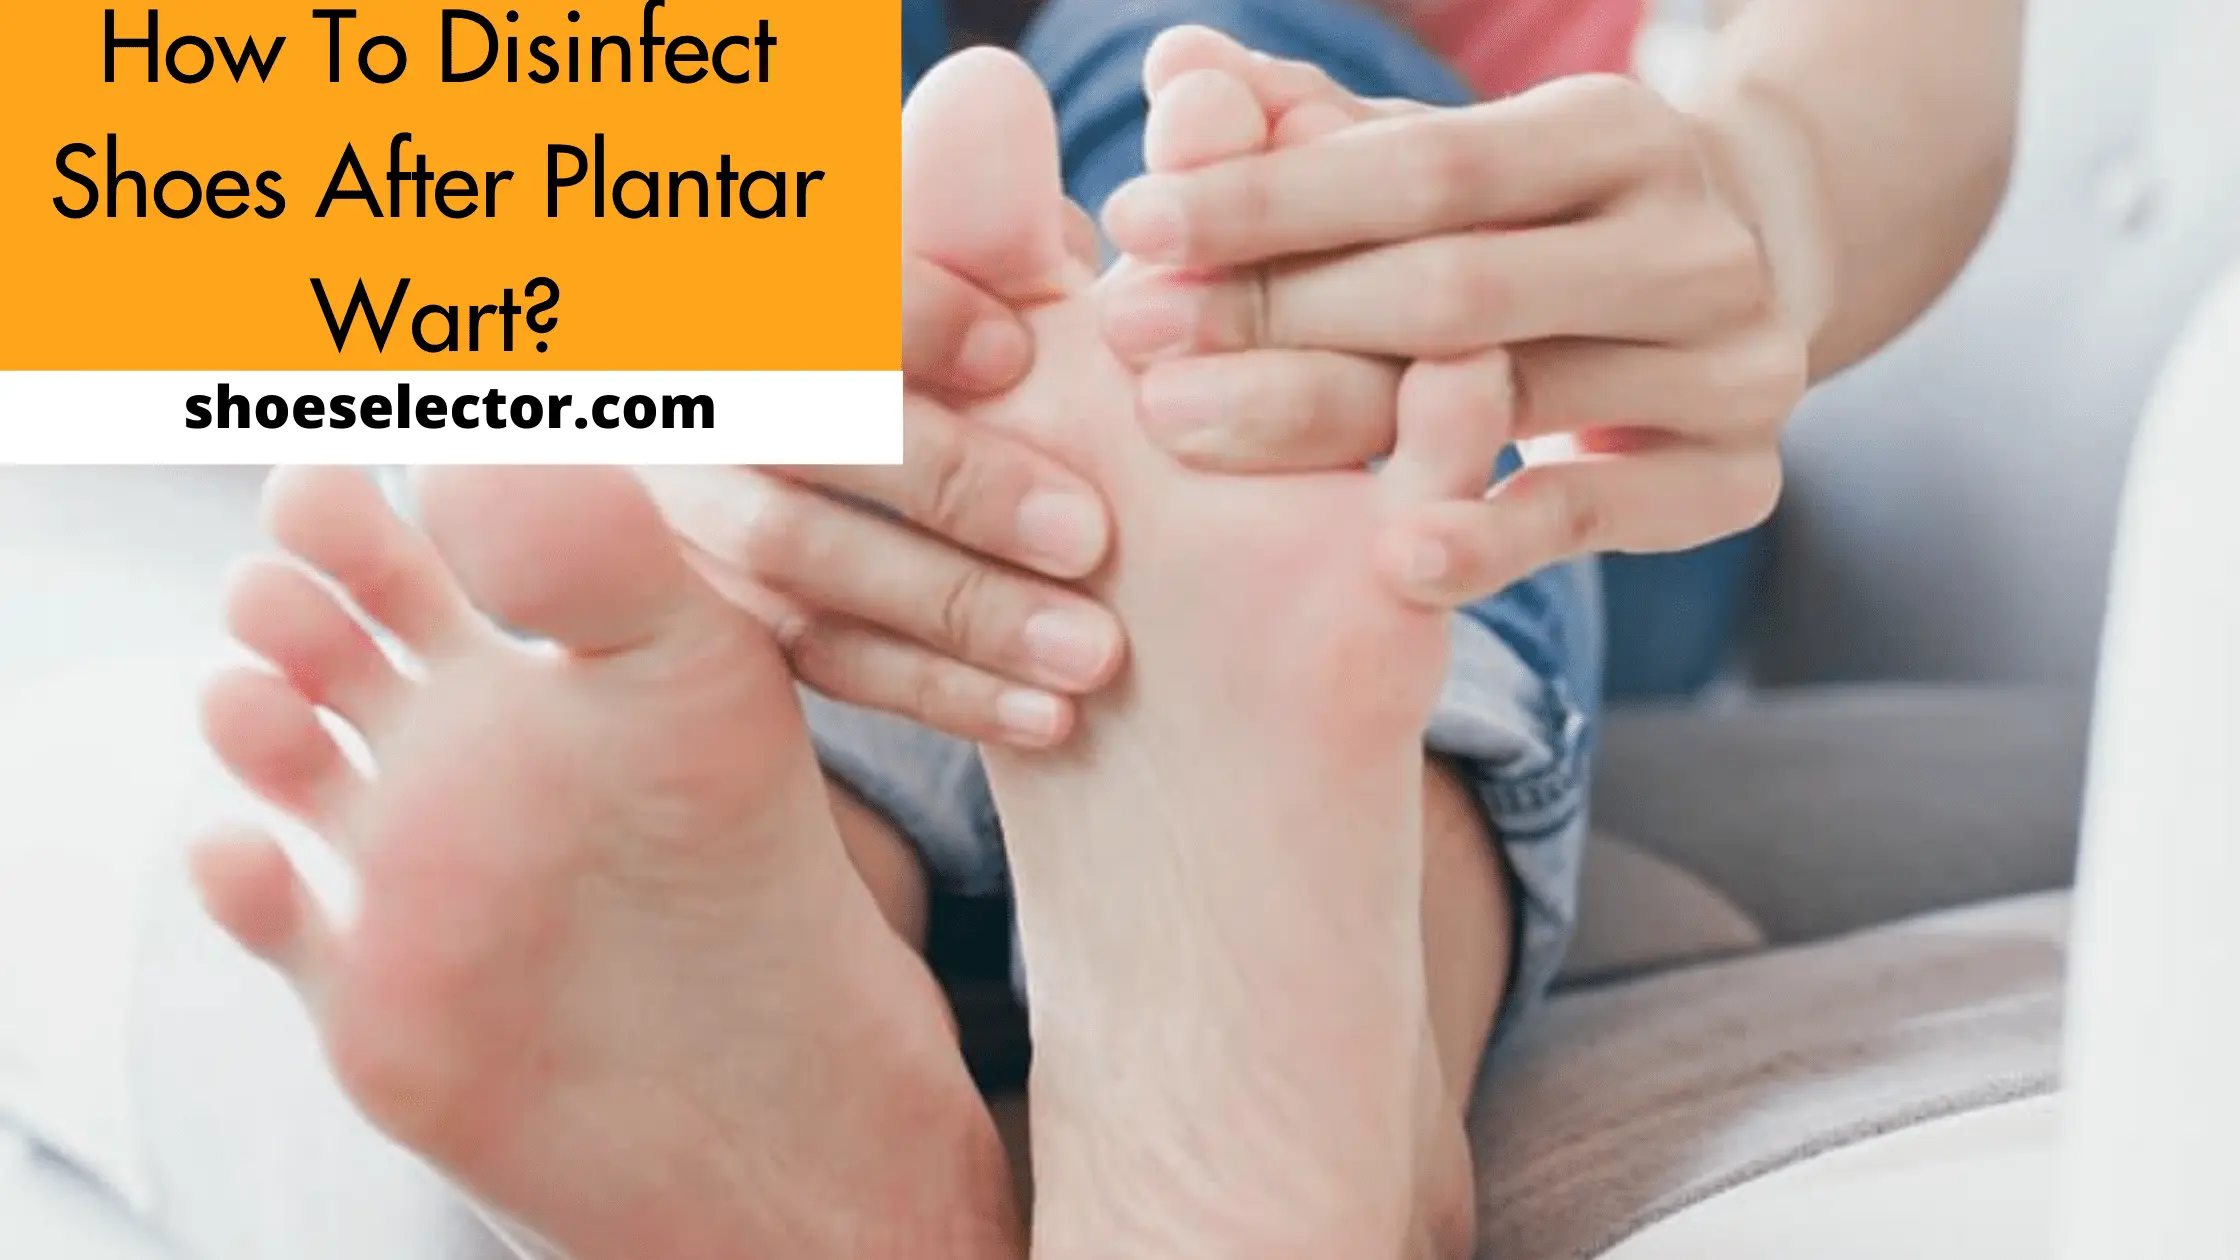 How to Disinfect Shoes After Plantar Wart? Pro Tips